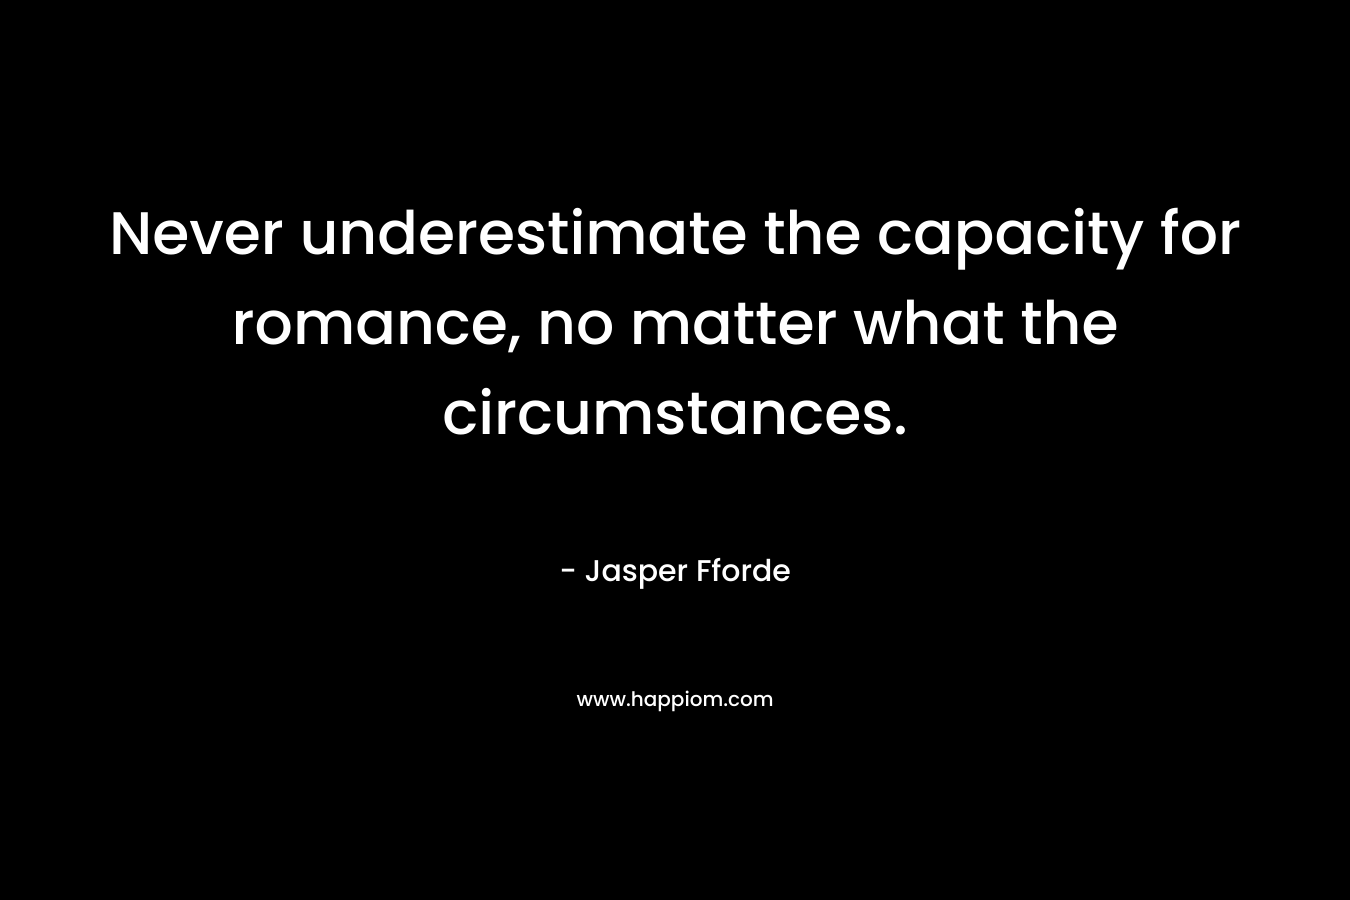 Never underestimate the capacity for romance, no matter what the circumstances.